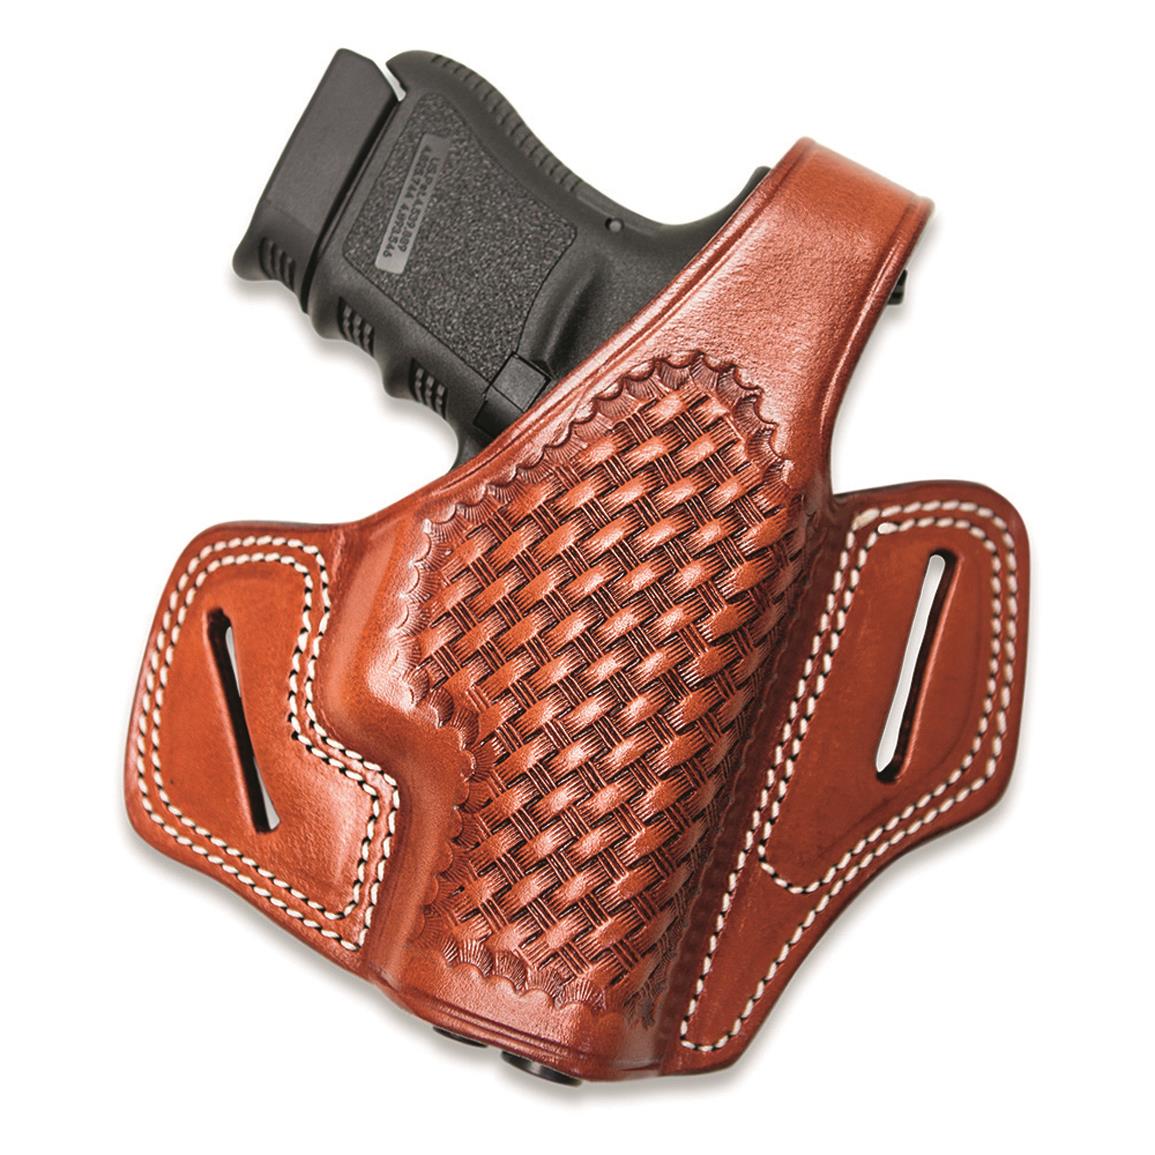 Cebeci Arms Leather Basketweave Belt-Slide Pancake Holster, Springfield XD9/XD40 4" Compact, Right